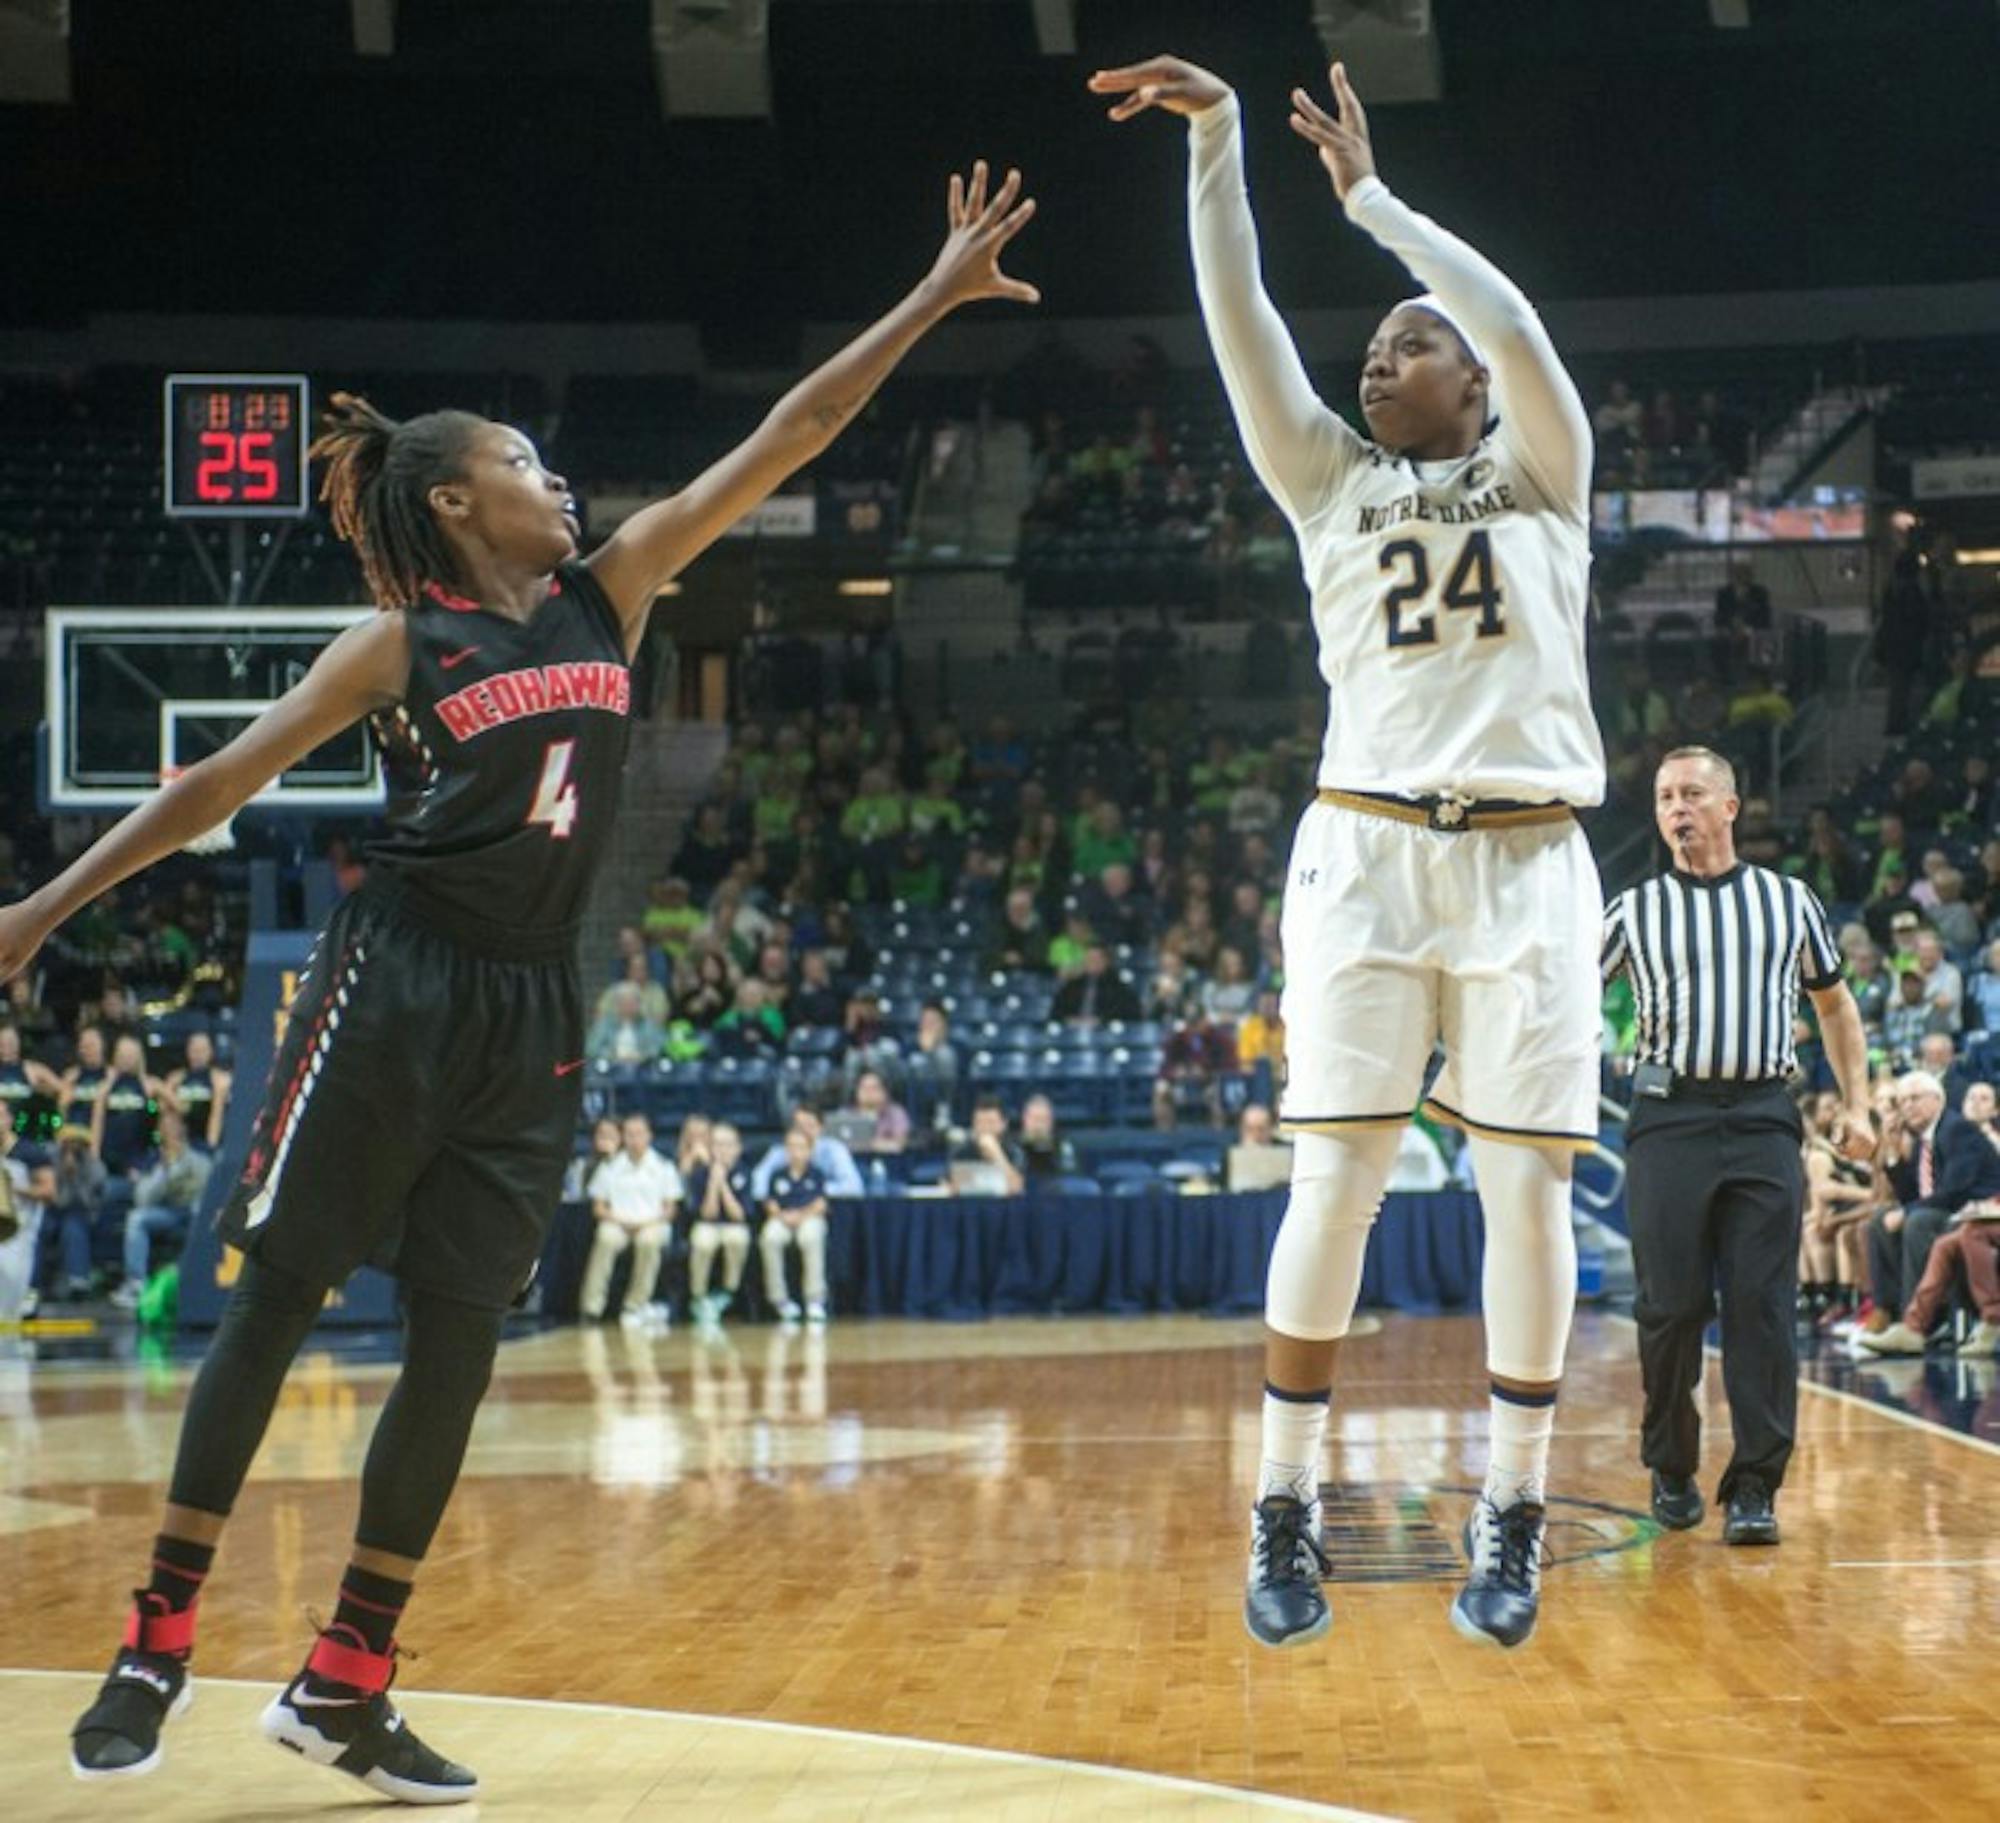 Irish sophomore guard Arike Ogunbowale fires a shot from the three-point line in Notre Dame’s 129-50 win over Roberts Wesleyan on Nov. 3.